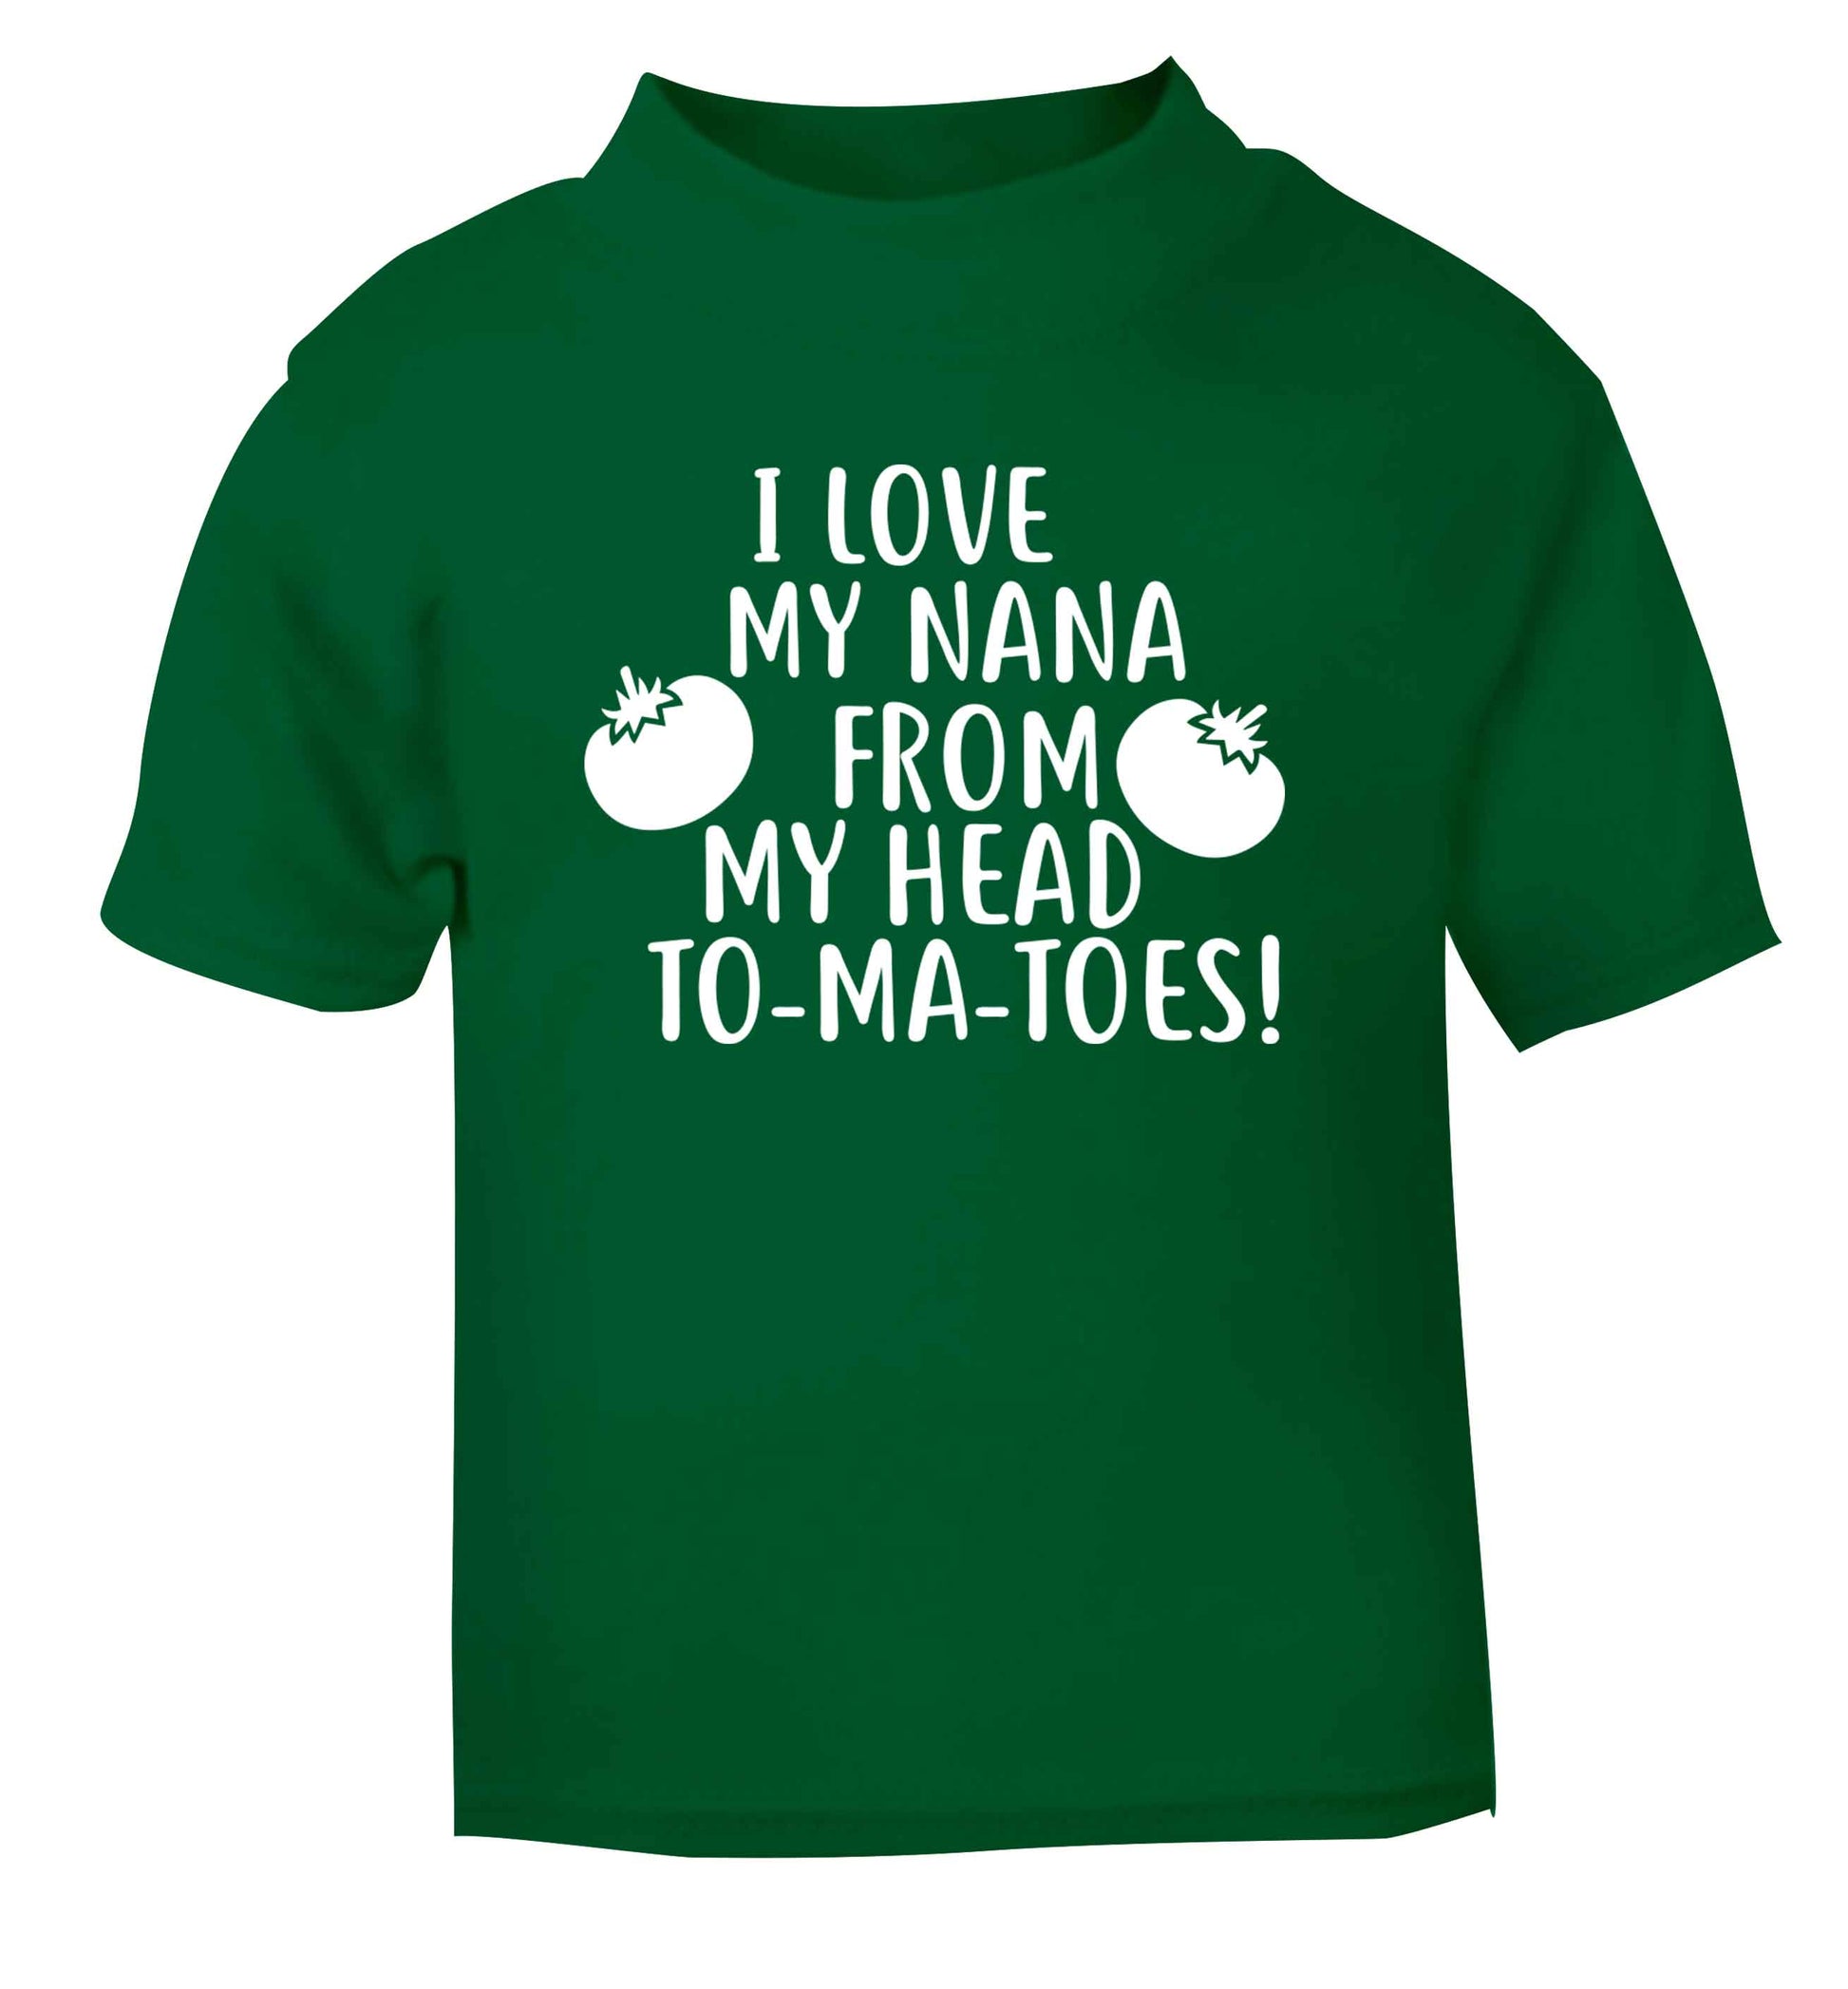 I love my nana from my head to-ma-toes green Baby Toddler Tshirt 2 Years